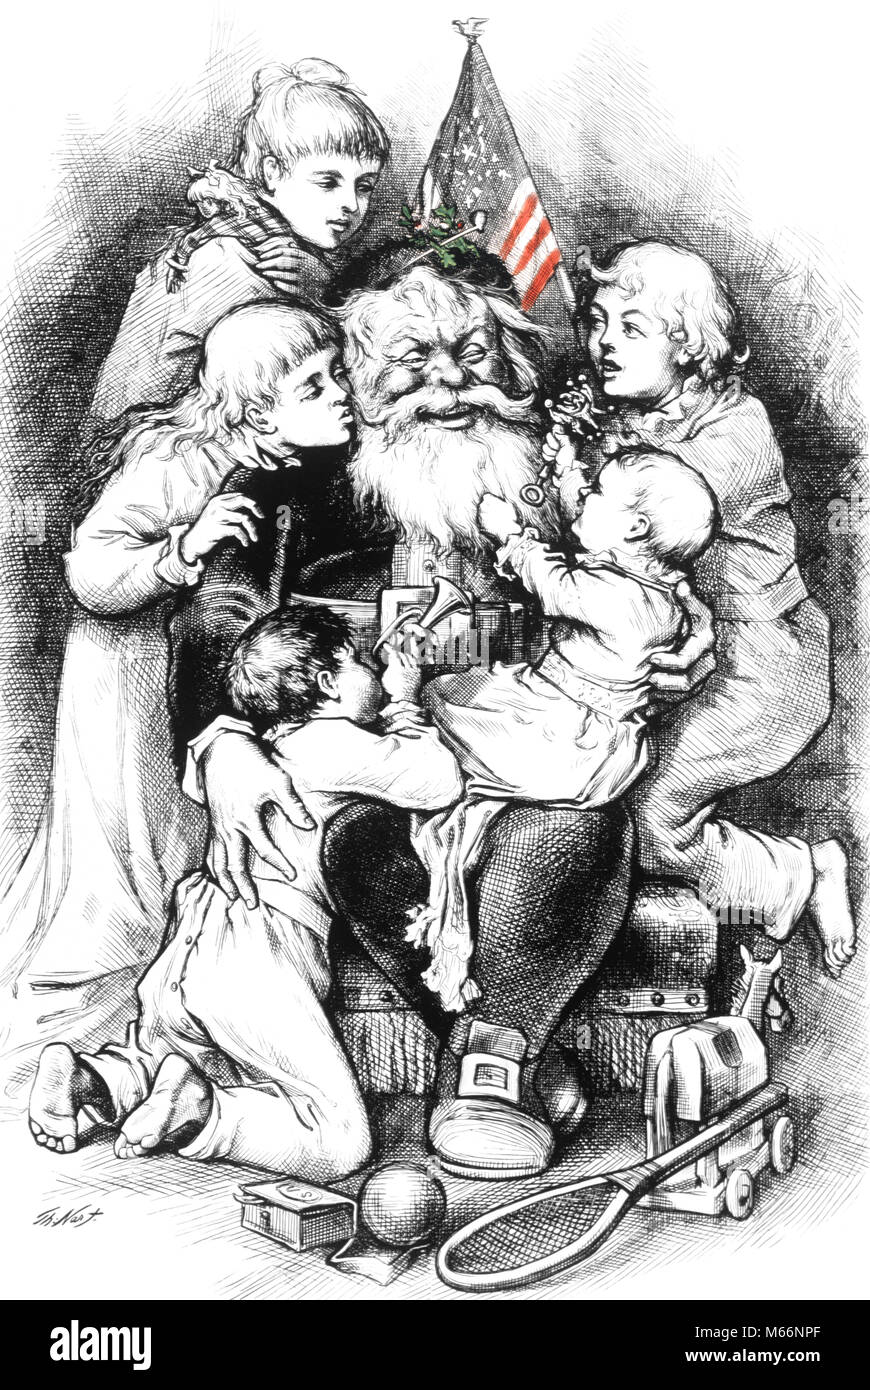 1880S THOMAS NAST LINE DRAWING OF CHILDREN AND SANTA CLAUS WITH RED WHITE AND BLUE AMERICAN FLAG - kx13204 NAW001 HARS CLAUS HOME LIFE COPY SPACE HALF-LENGTH INDOORS SENIOR MAN SAINT SENIOR ADULT NOSTALGIA HISTORIC DREAMS HAPPINESS AND EXCITEMENT SANTA CLAUS HOLLY FACIAL HAIR DECEMBER DECEMBER 25 1880s KRIS KRINGLE ST. NICK SMALL GROUP OF PEOPLE FATHER CHRISTMAS JOLLY JUVENILES MALES NICHOLAS NAST OLD FASHIONED PERSONS THOMAS NAST Stock Photo